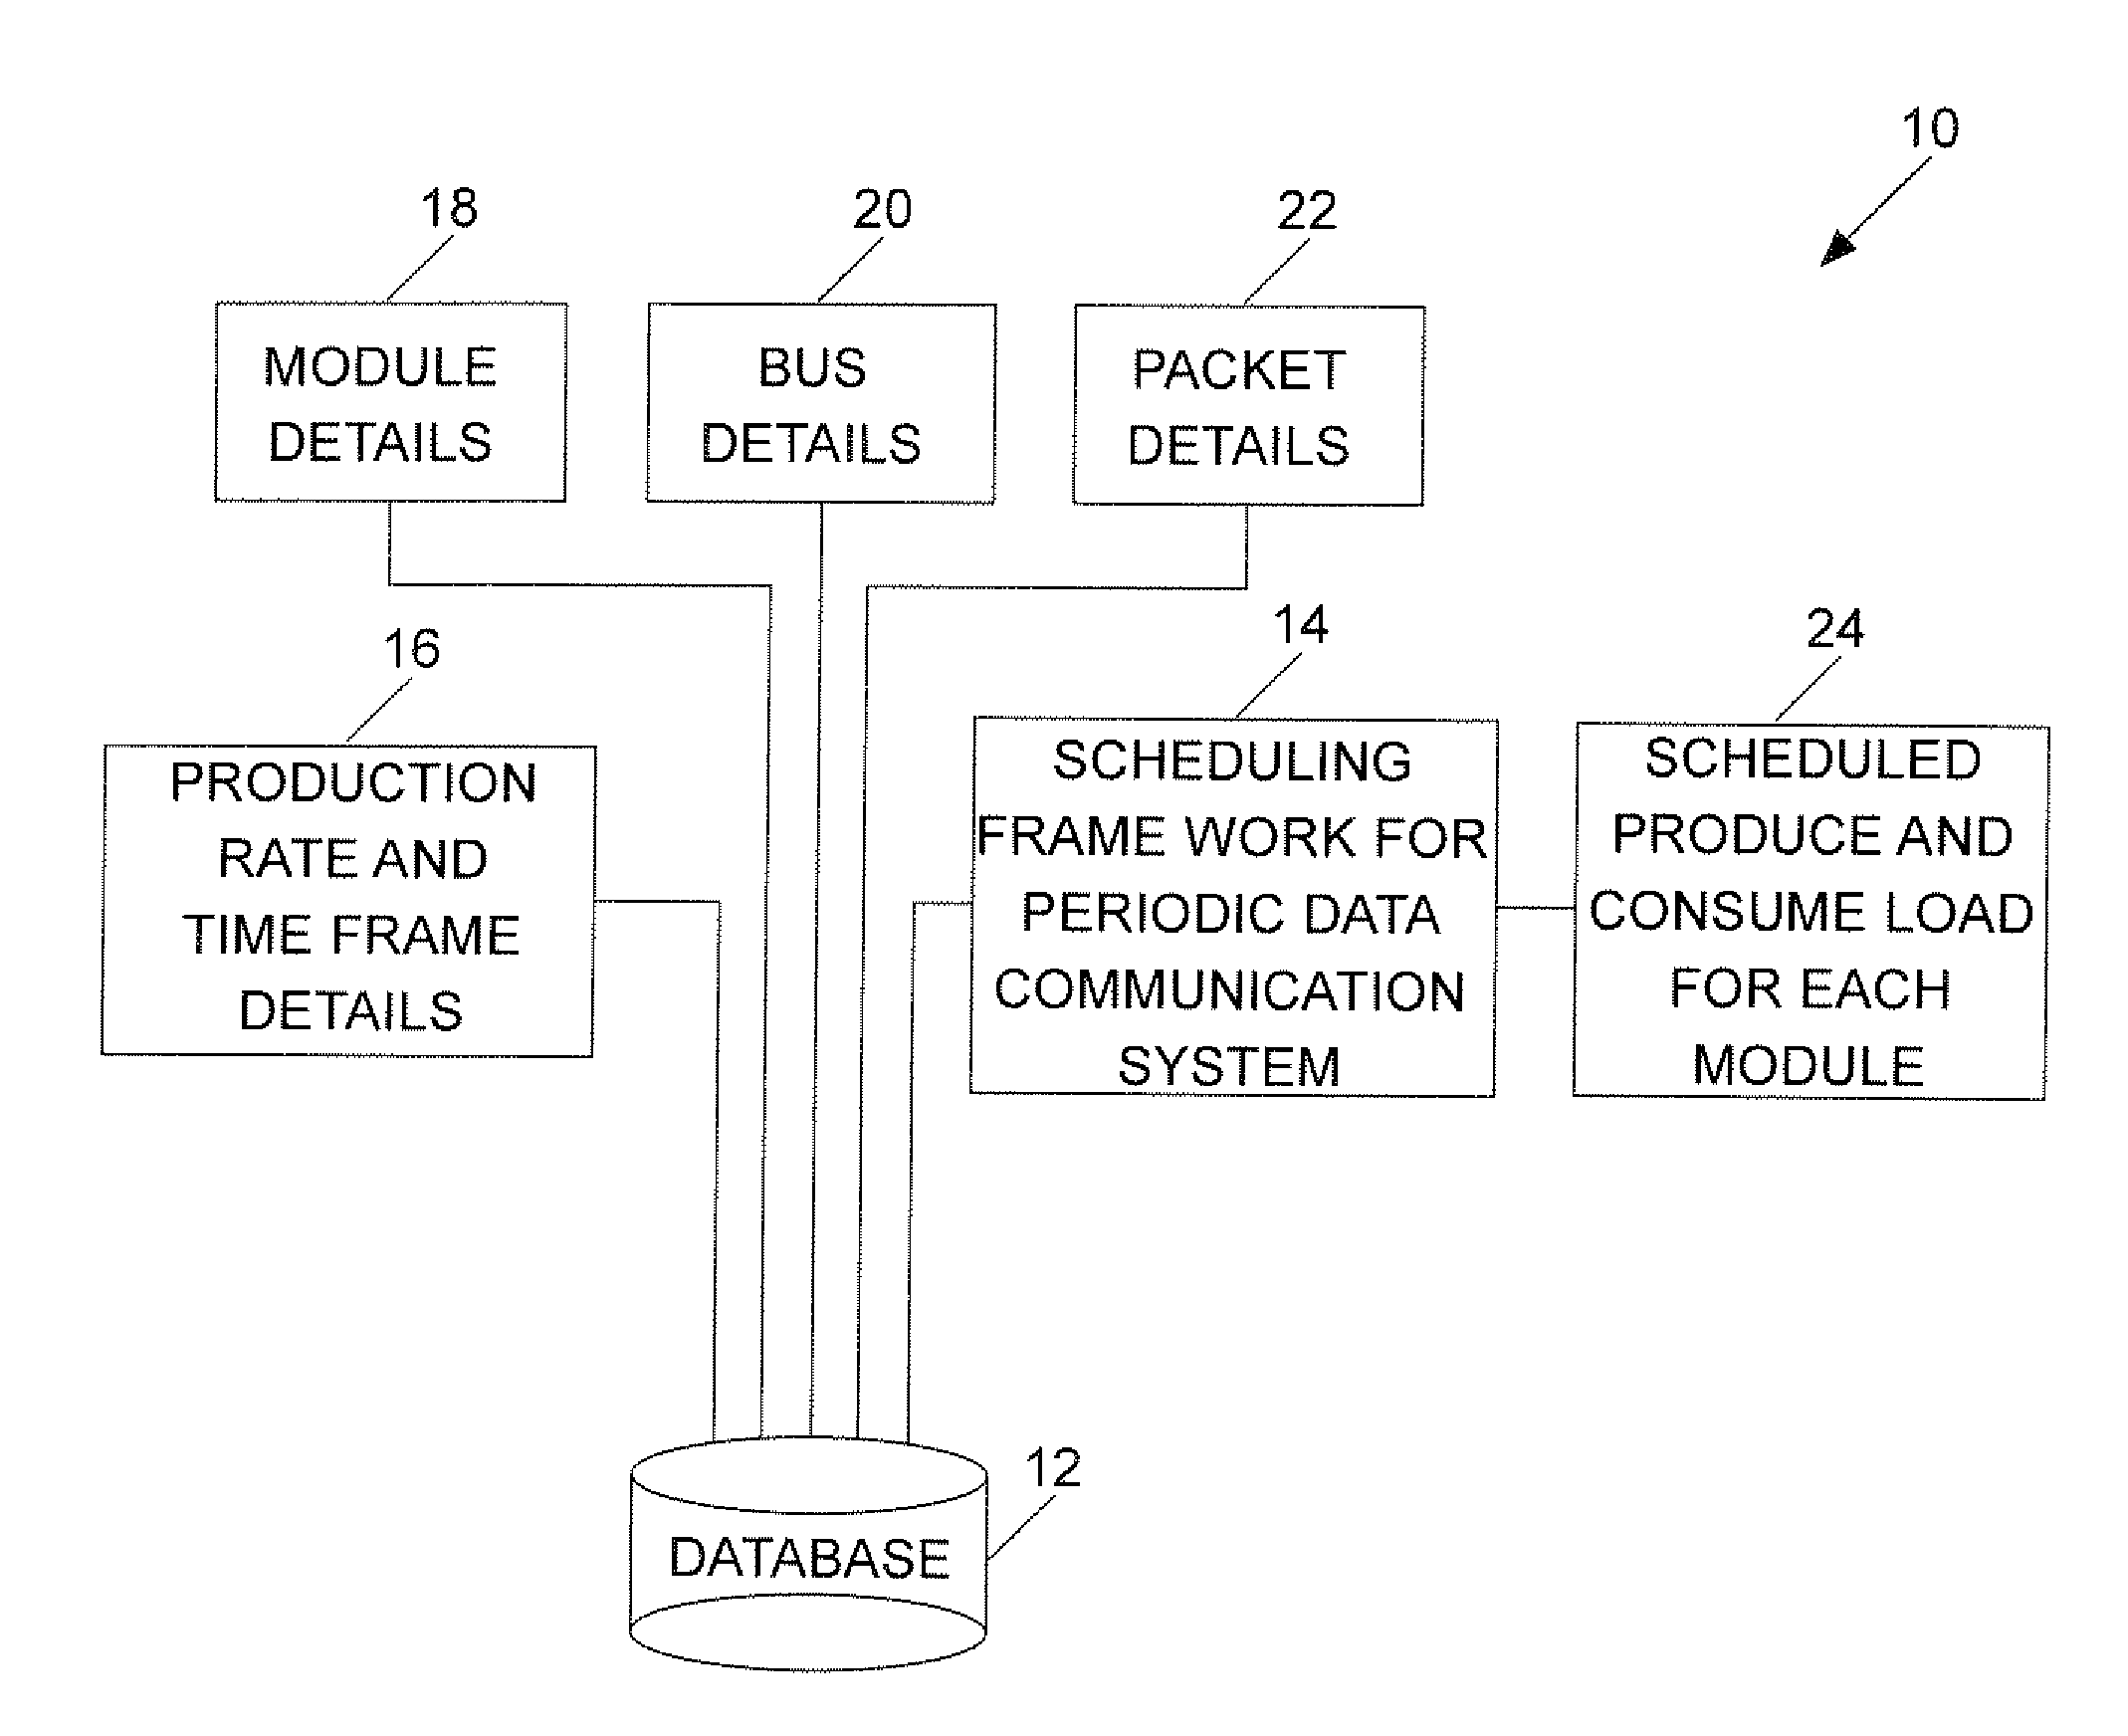 Optimization and/or scheduling framework for a periodic data communication system having multiple buses and hardware application modules